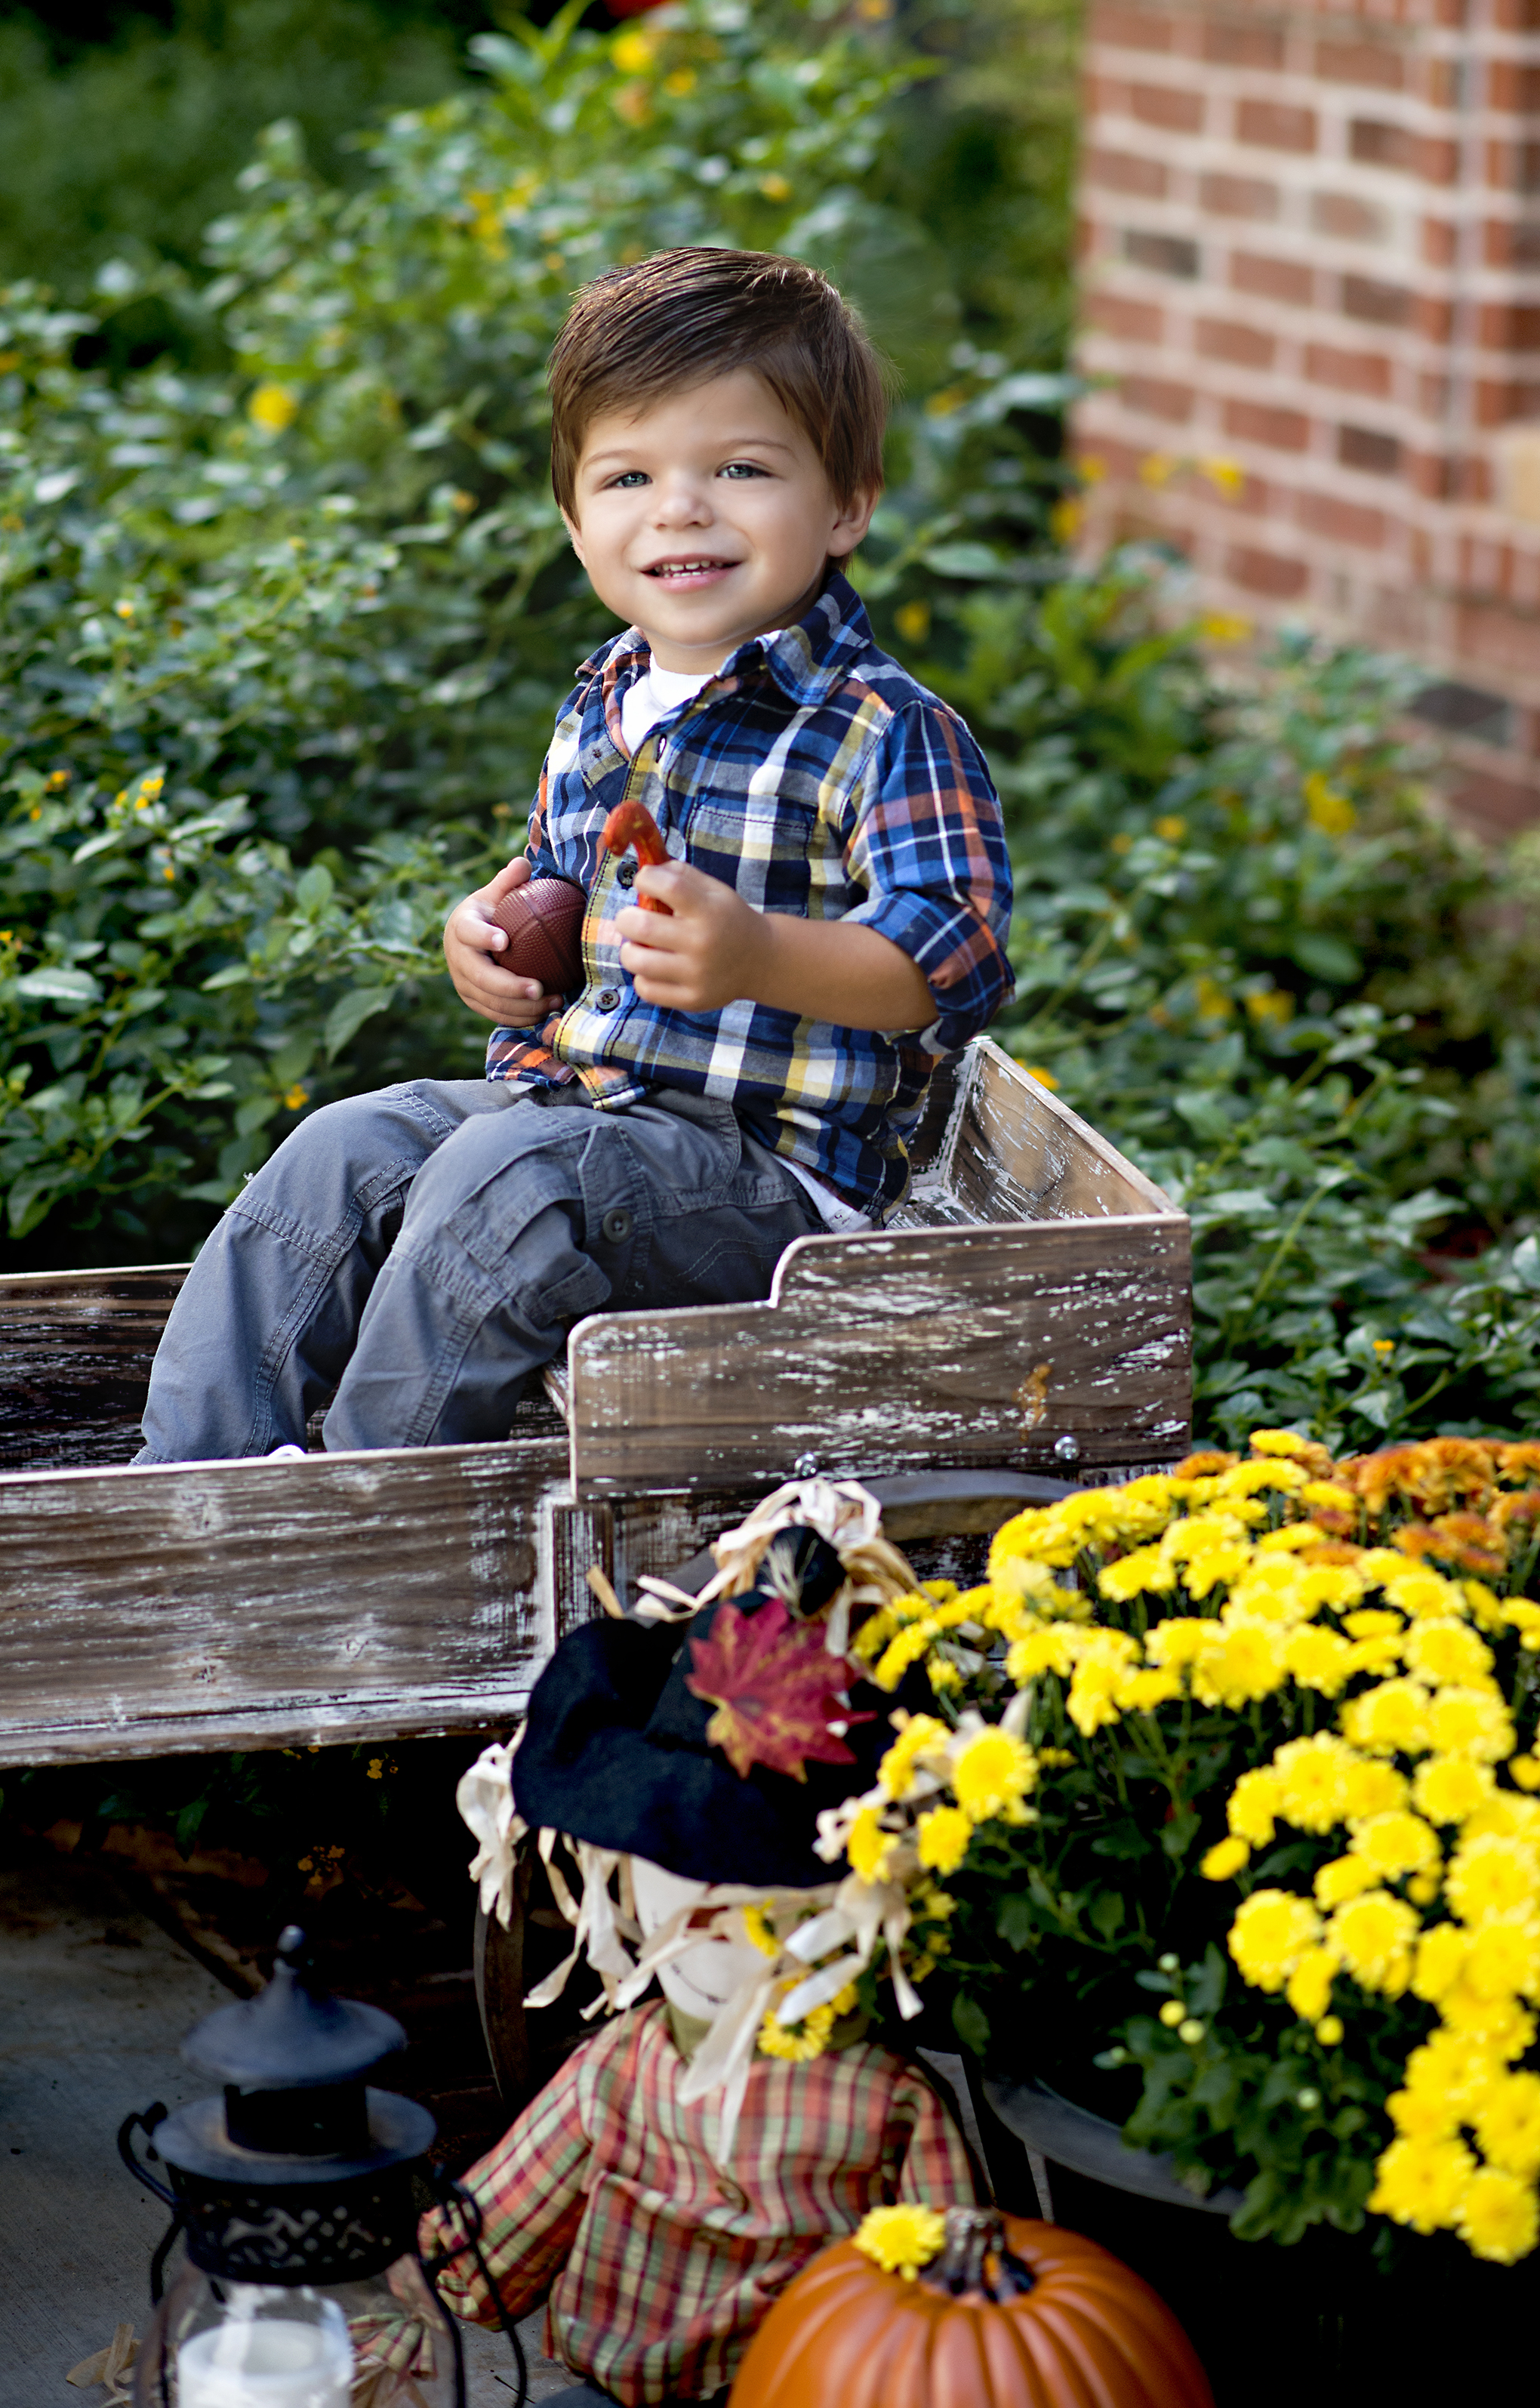 fun cousin session, fall colors, sweater weather, pumpkins, wagons, puddle jumping